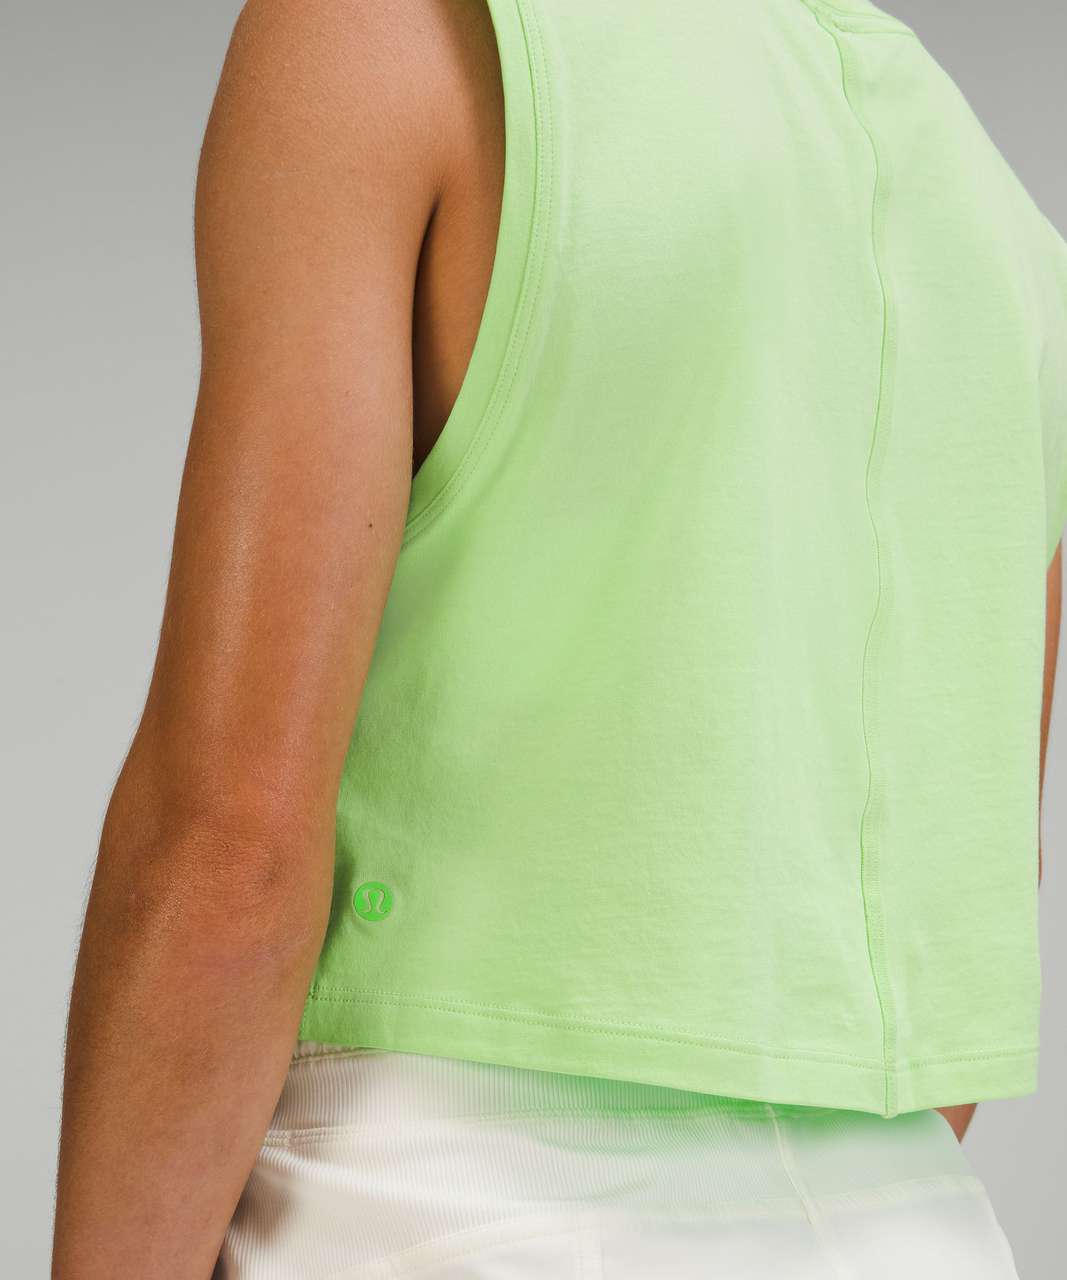 Lululemon All Yours Cropped Cotton Tank Top - Scream Green Light